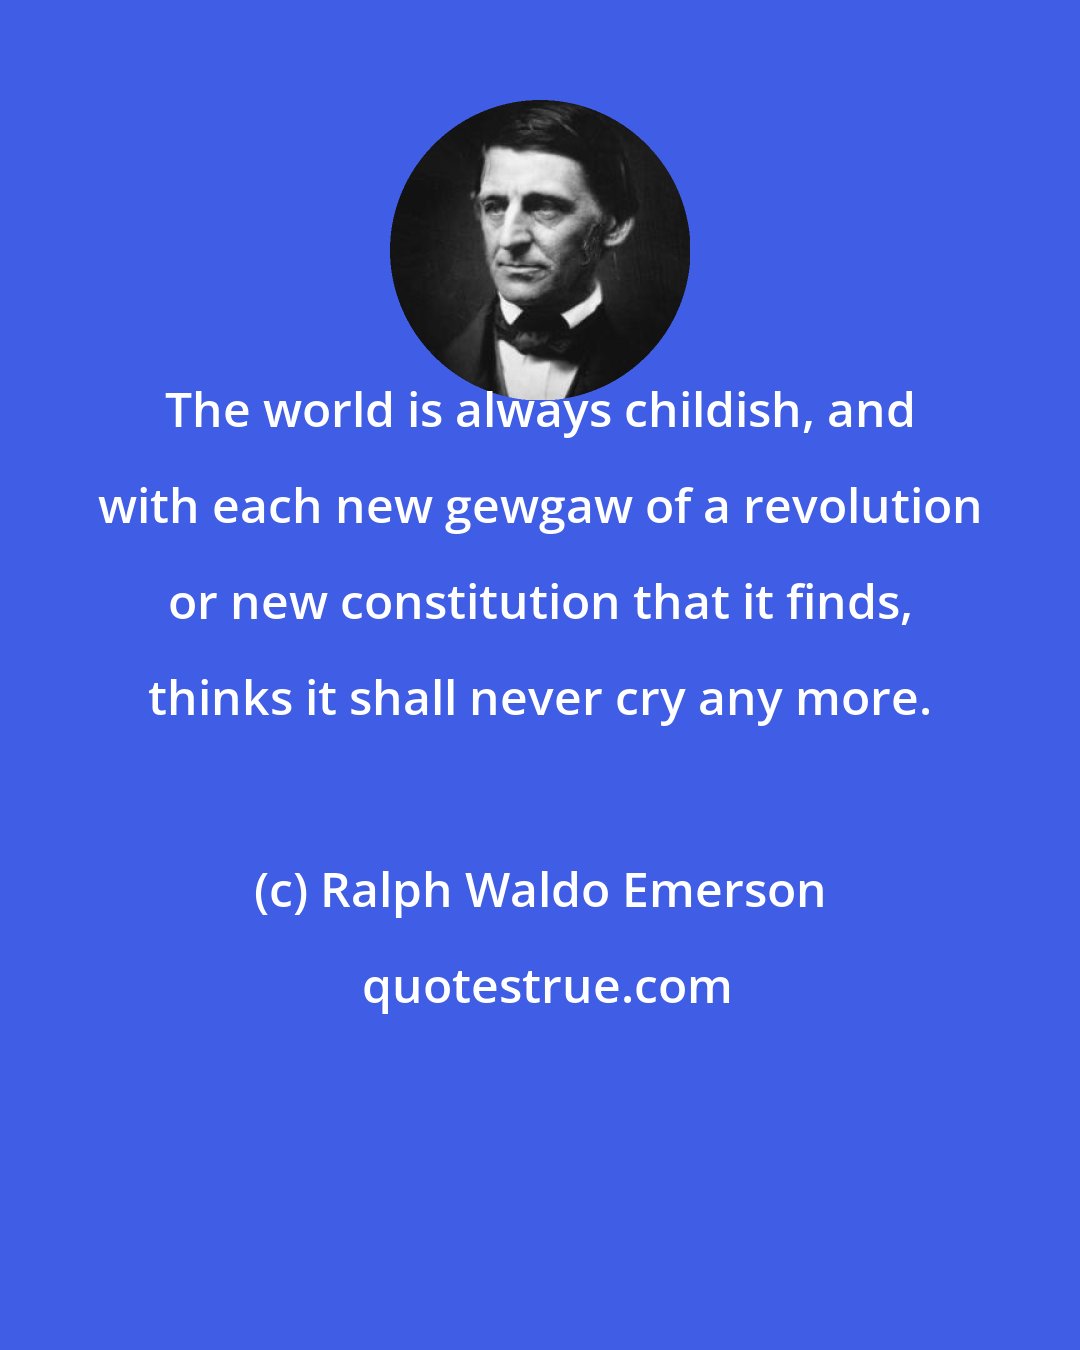 Ralph Waldo Emerson: The world is always childish, and with each new gewgaw of a revolution or new constitution that it finds, thinks it shall never cry any more.